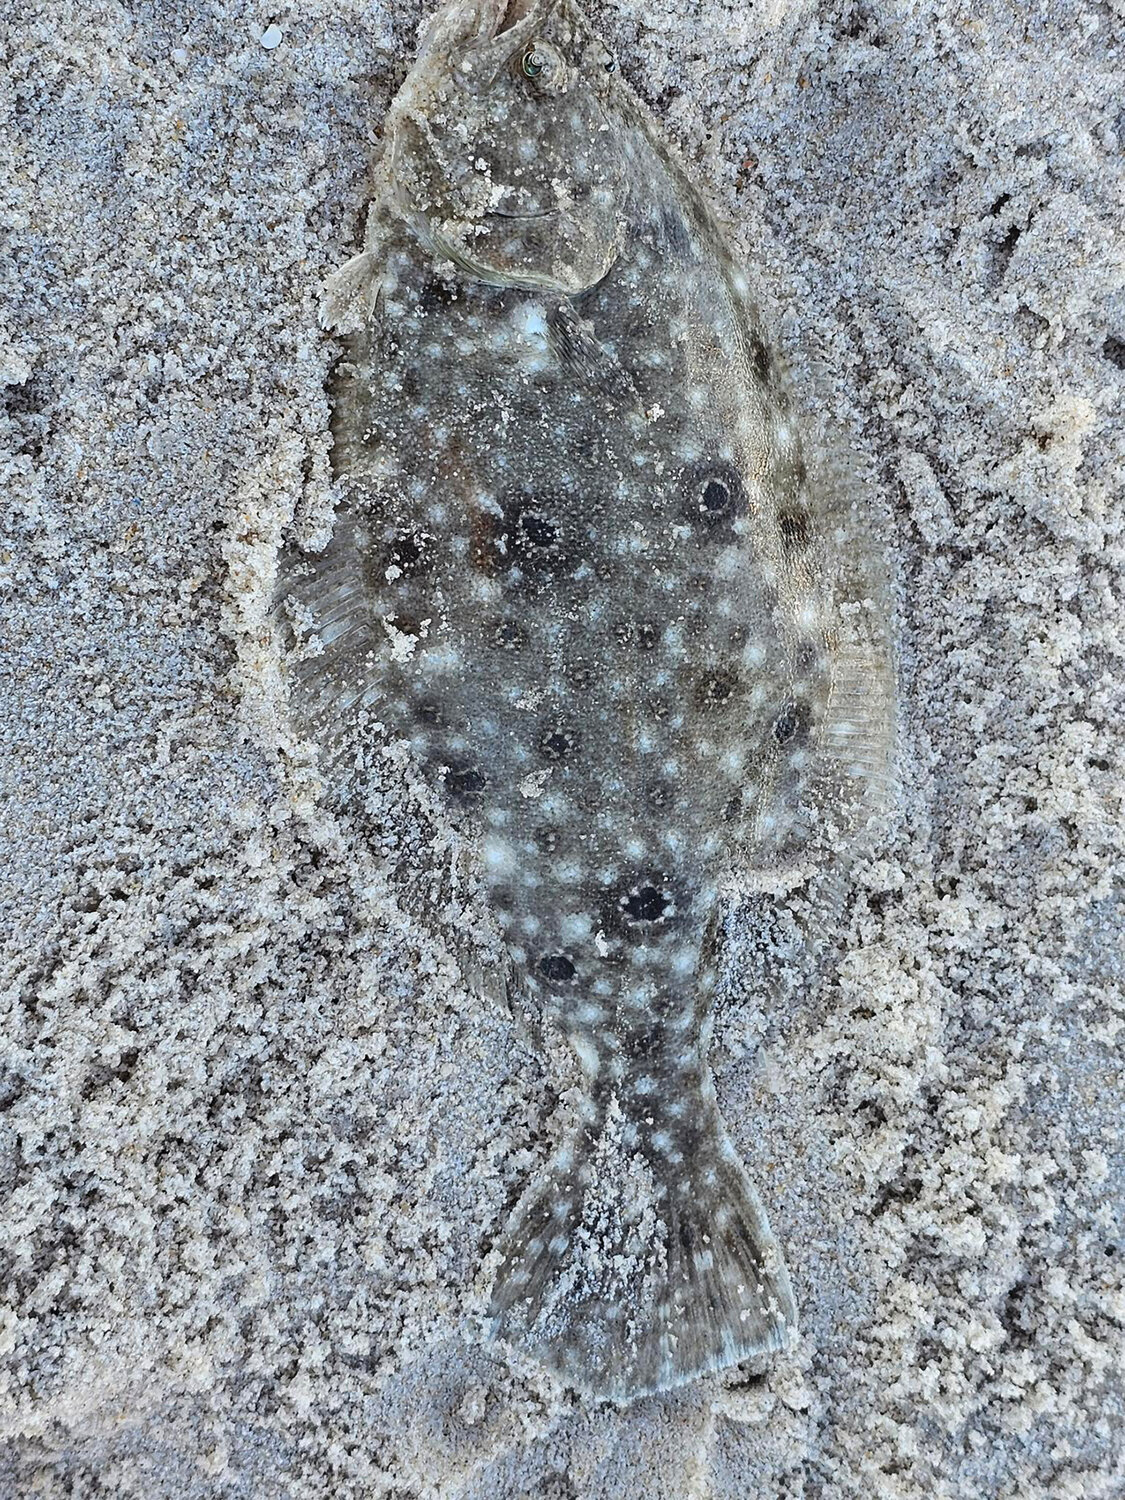 This flounder was caught in the surf at Assateague by George's crew.